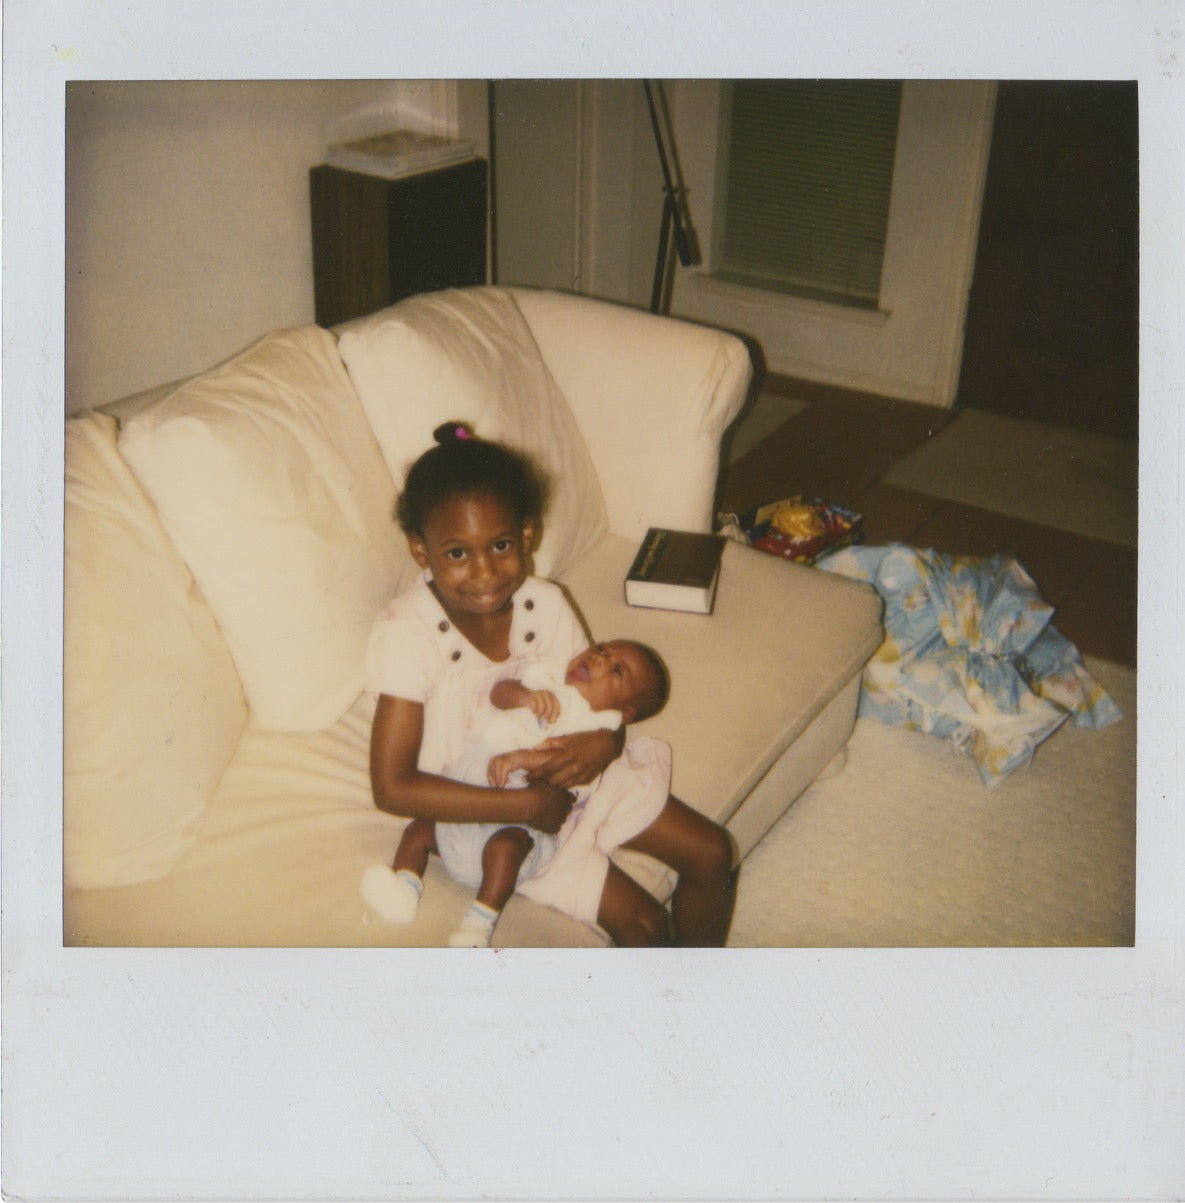 old polaroid photograph of two young Black children, one a toddler and one an infant cradled in the toddlers arms.